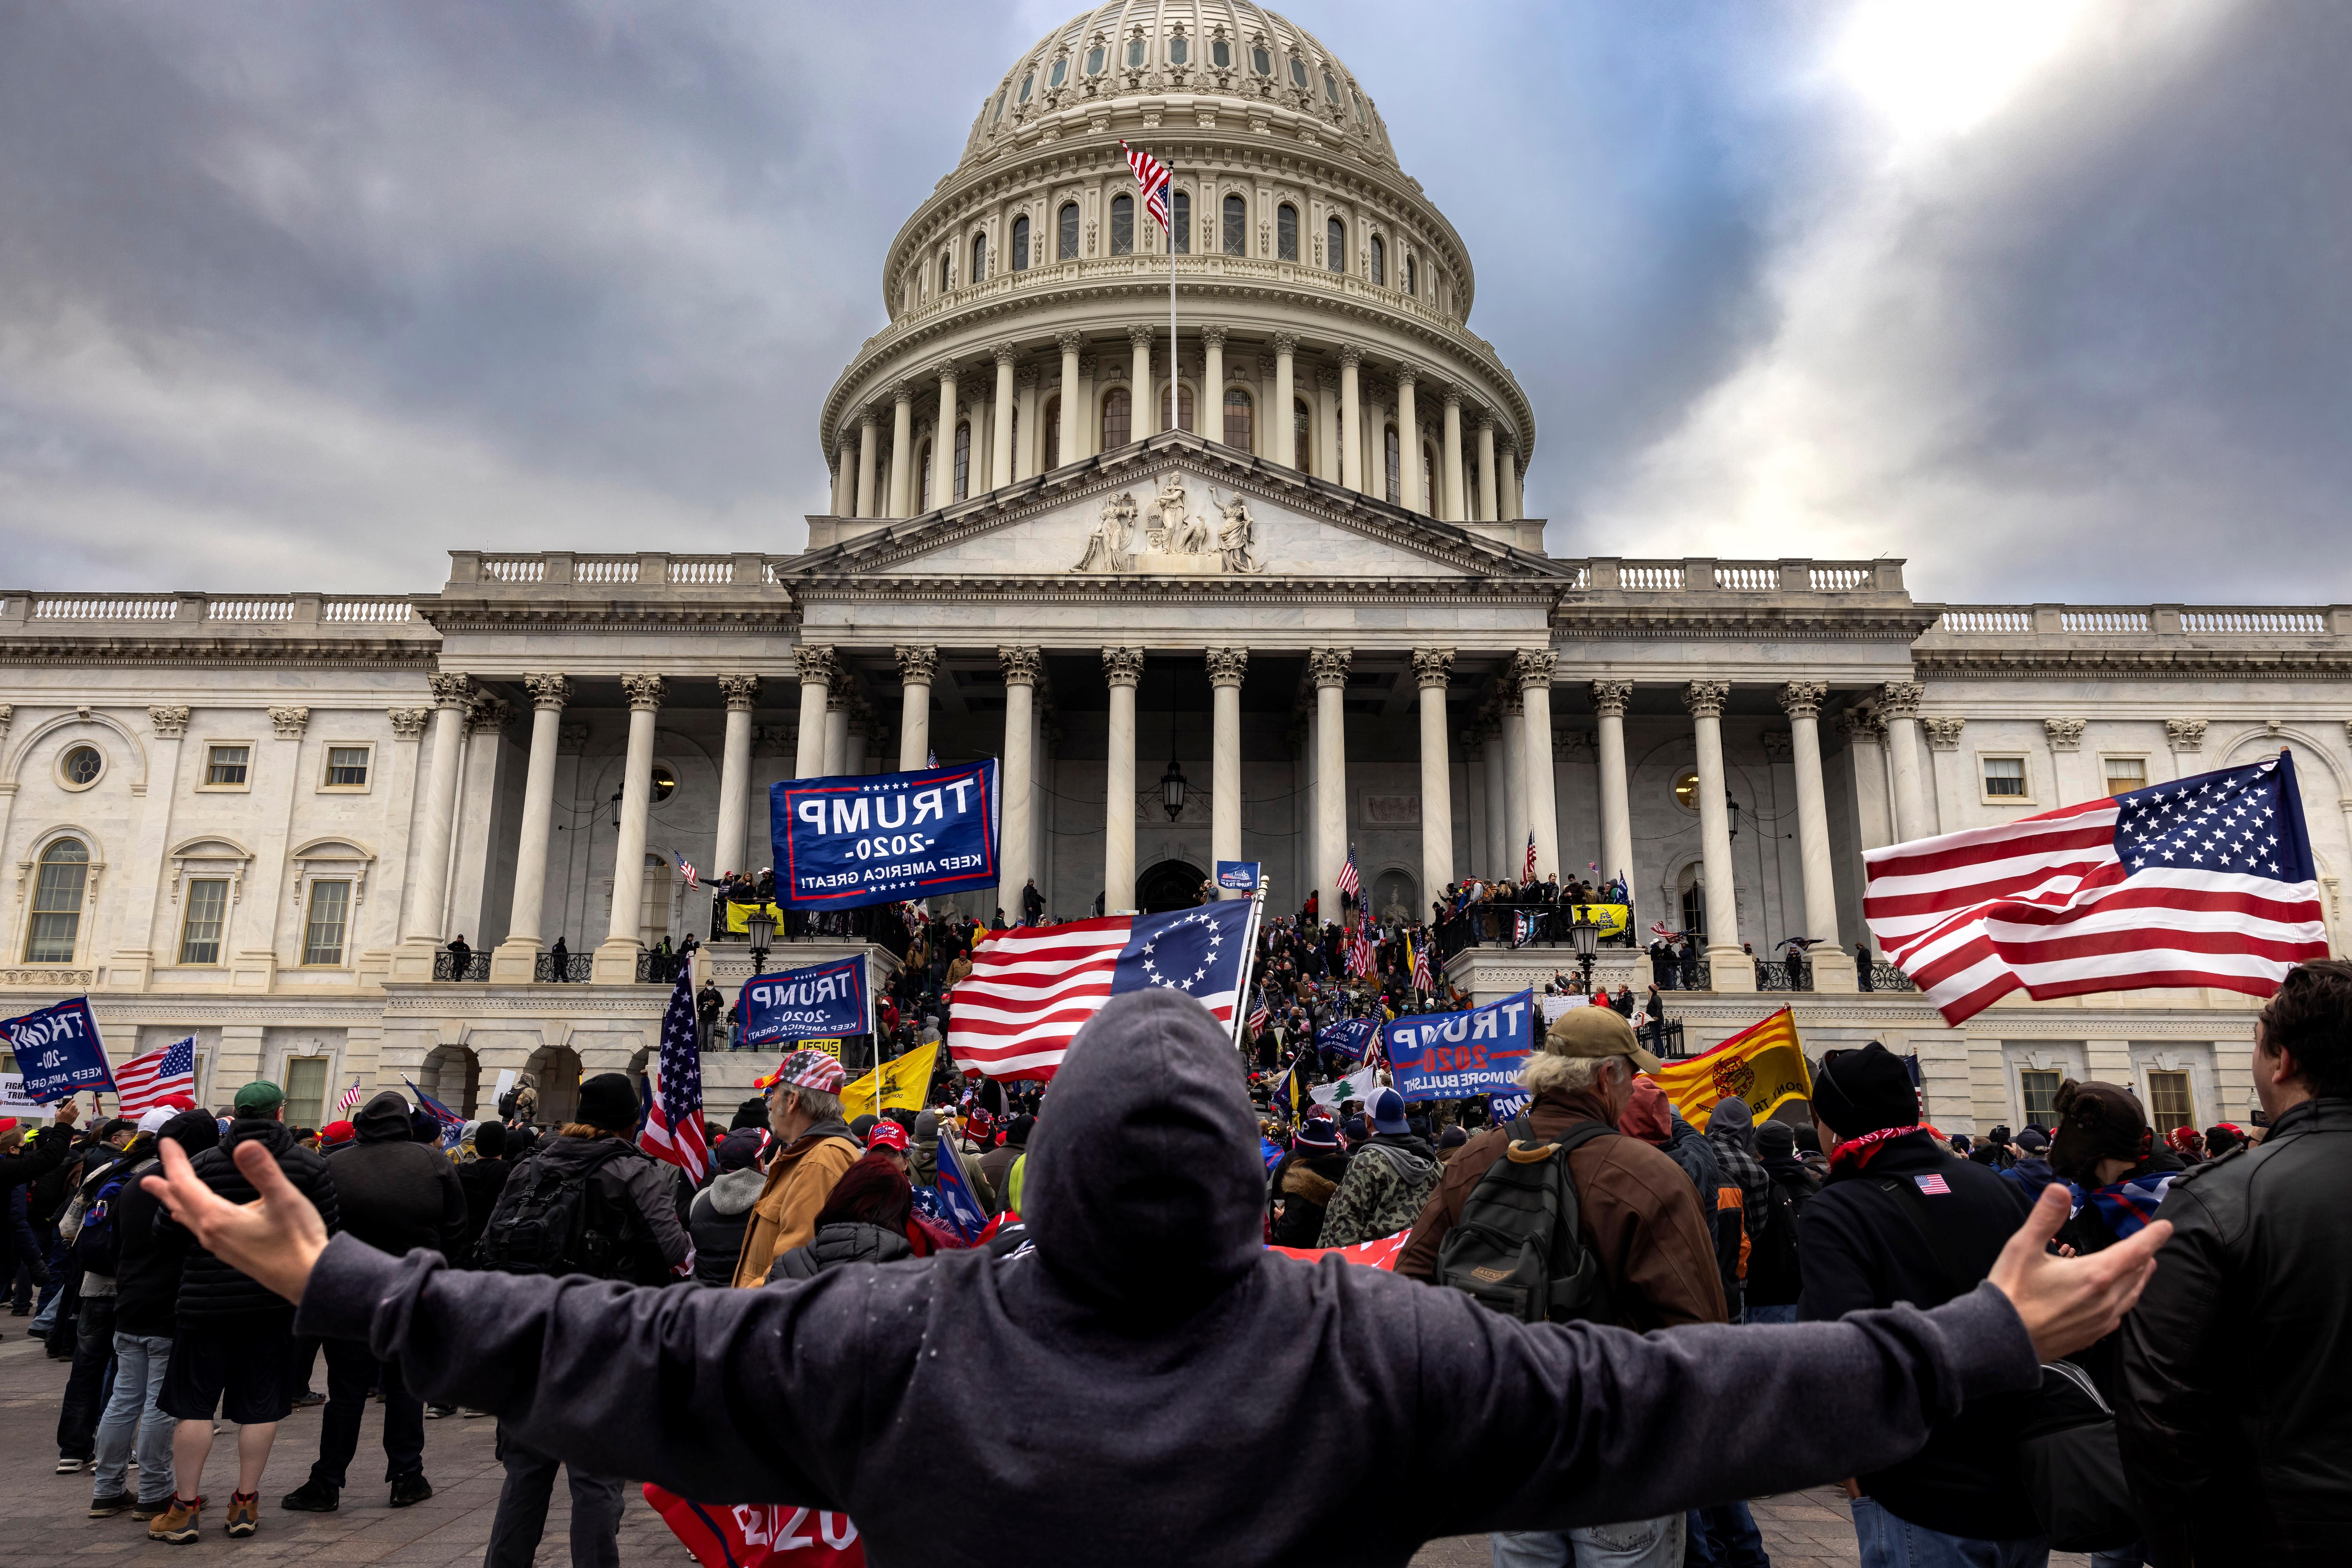 Pro-Trump protesters gather in front of the U.S. Capitol.